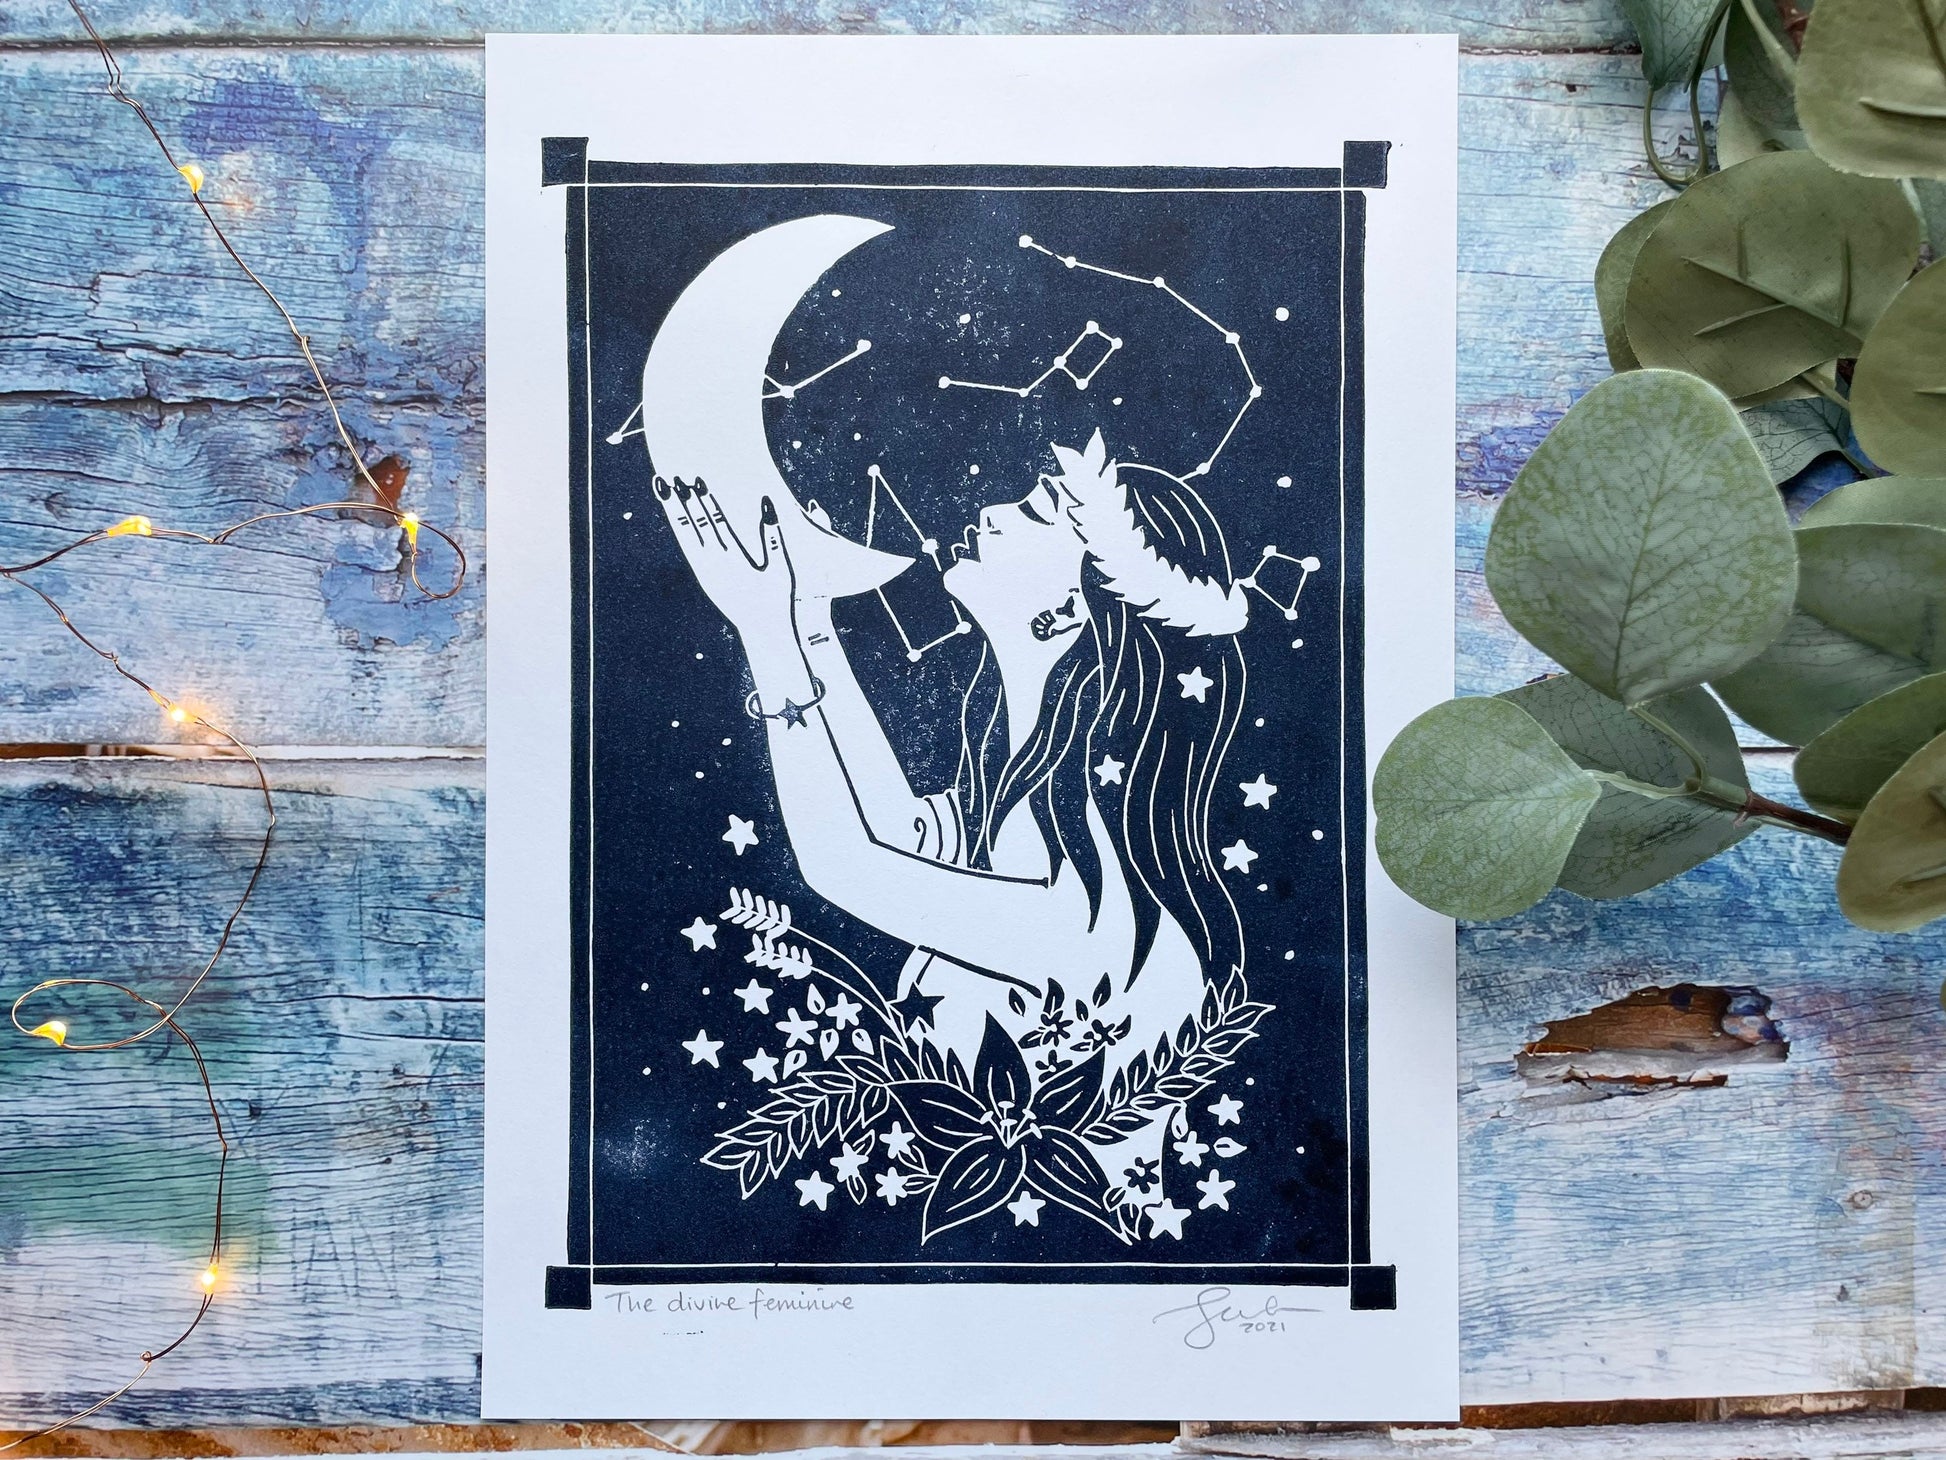 An A4 lino print of a women holding the moon up to her face with her hands, she's surrounded by stars and flowers